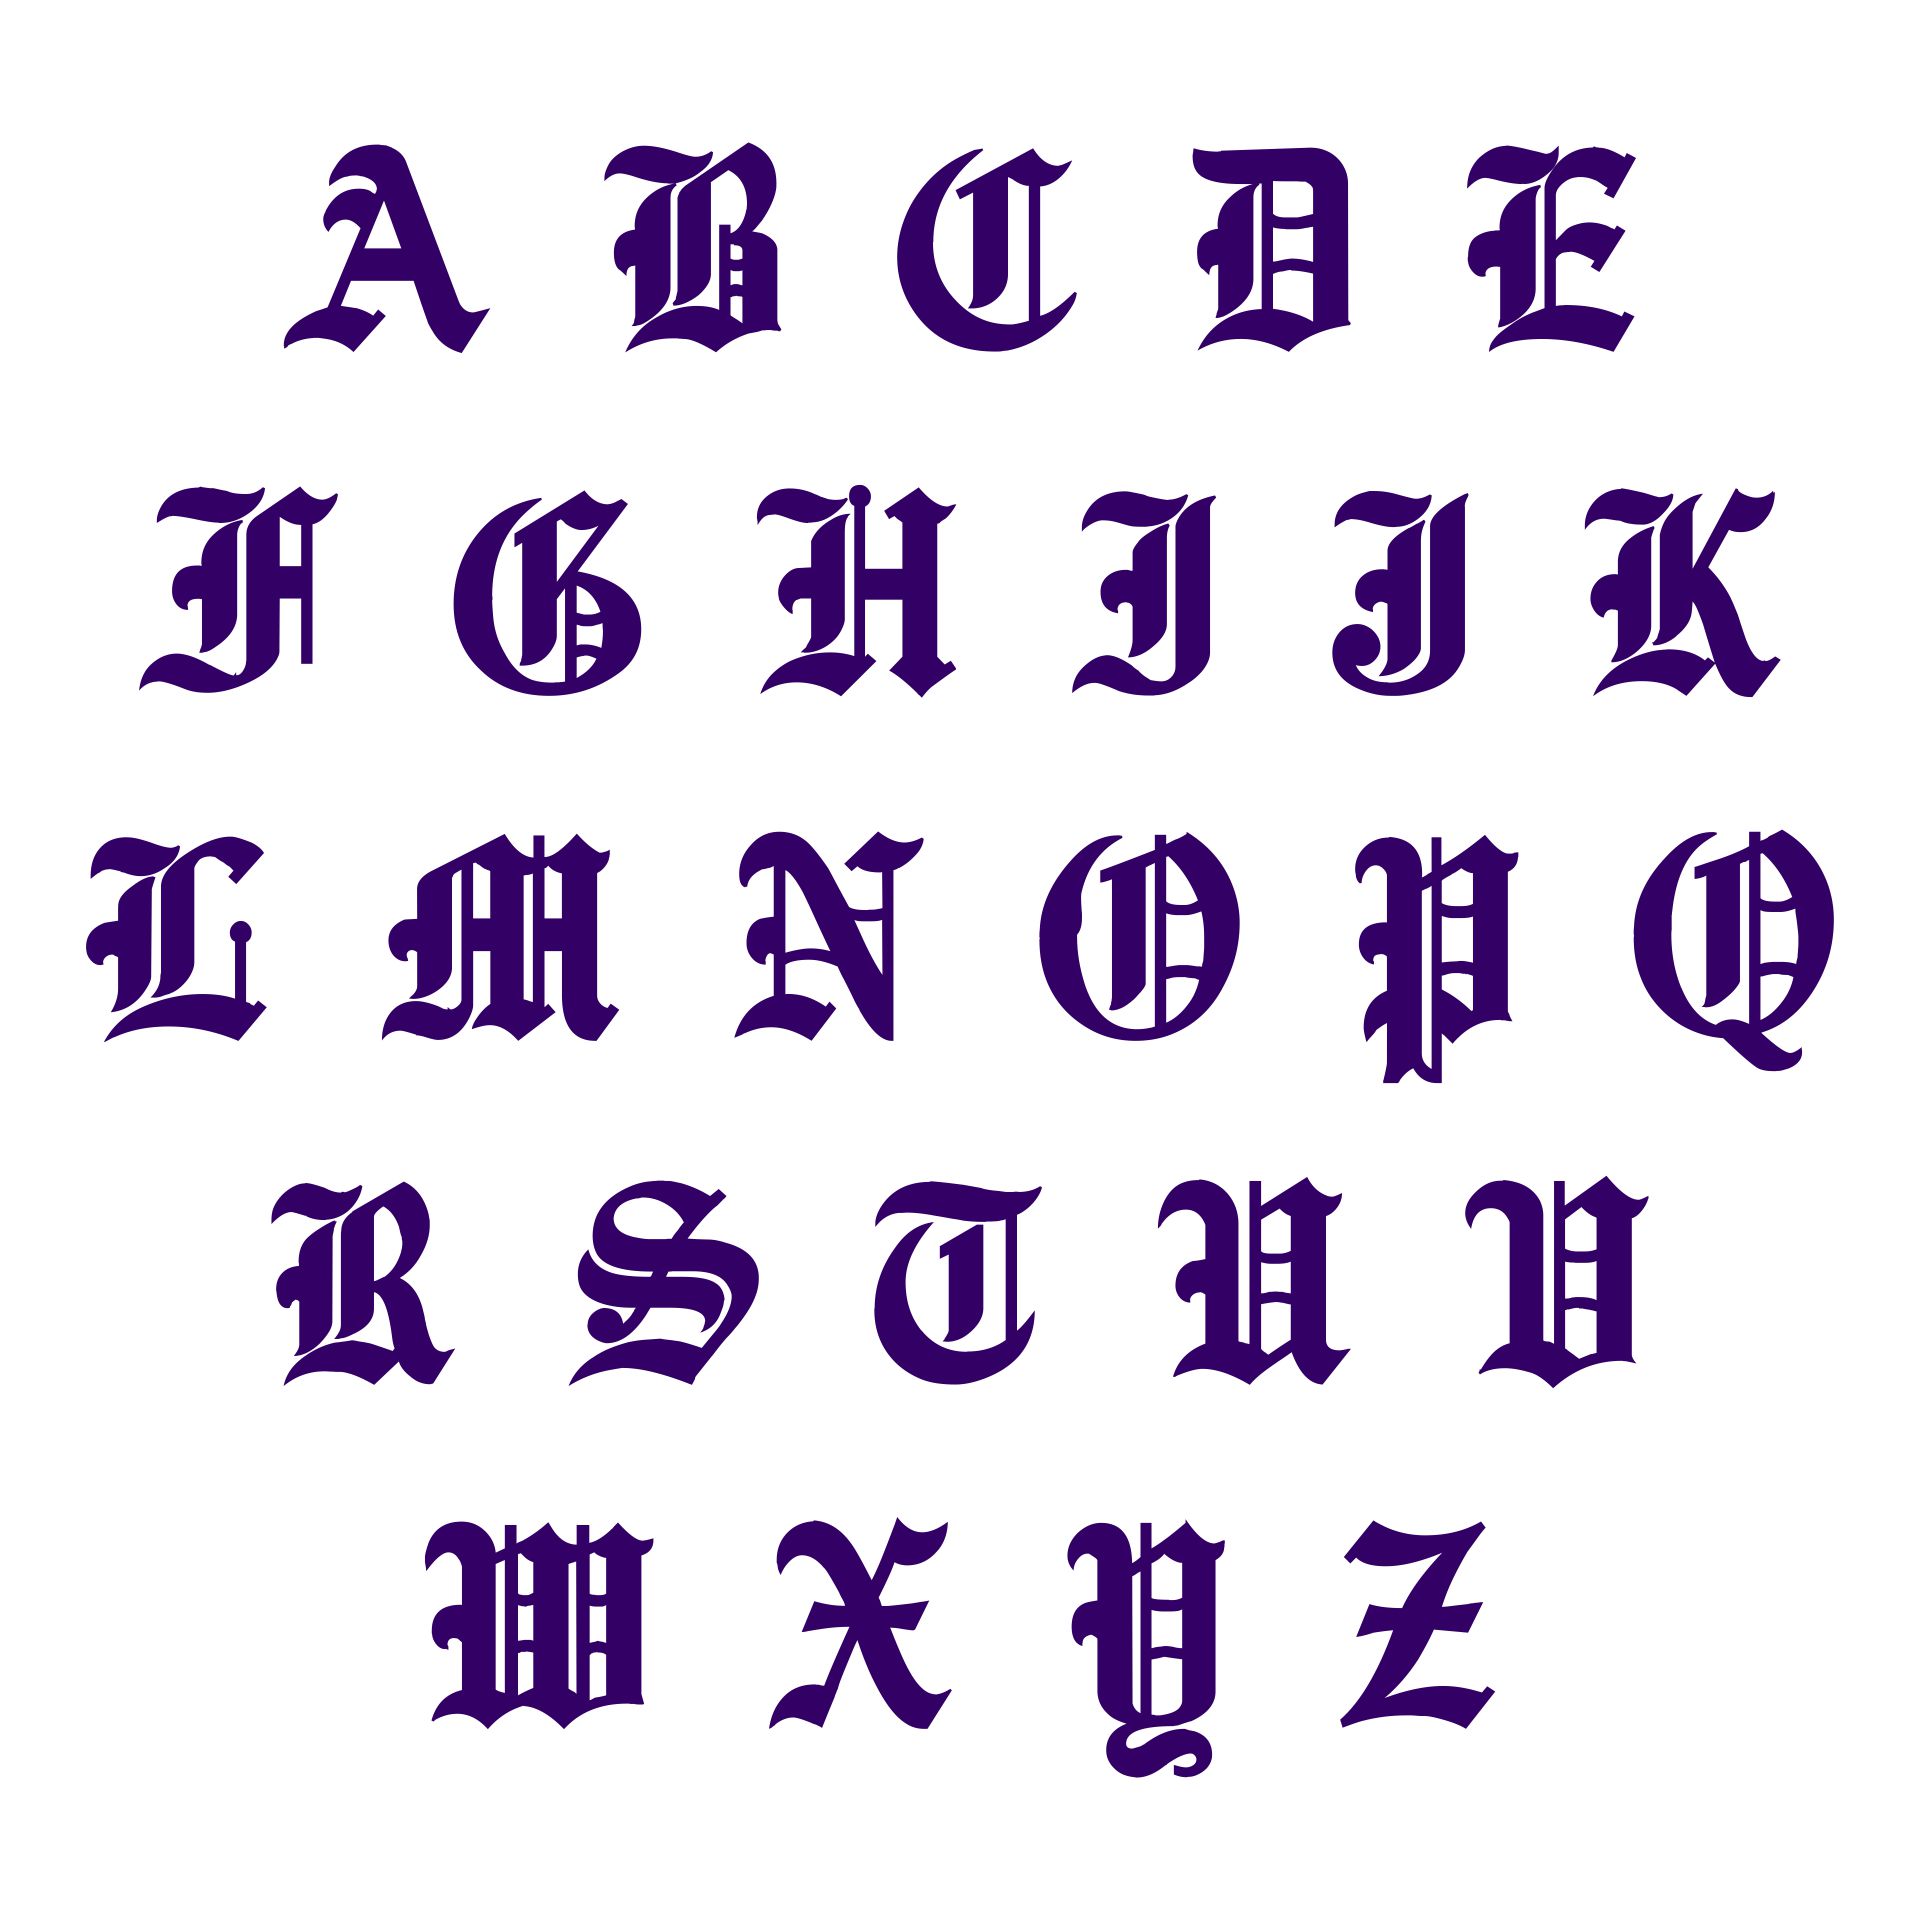 old english letters font james